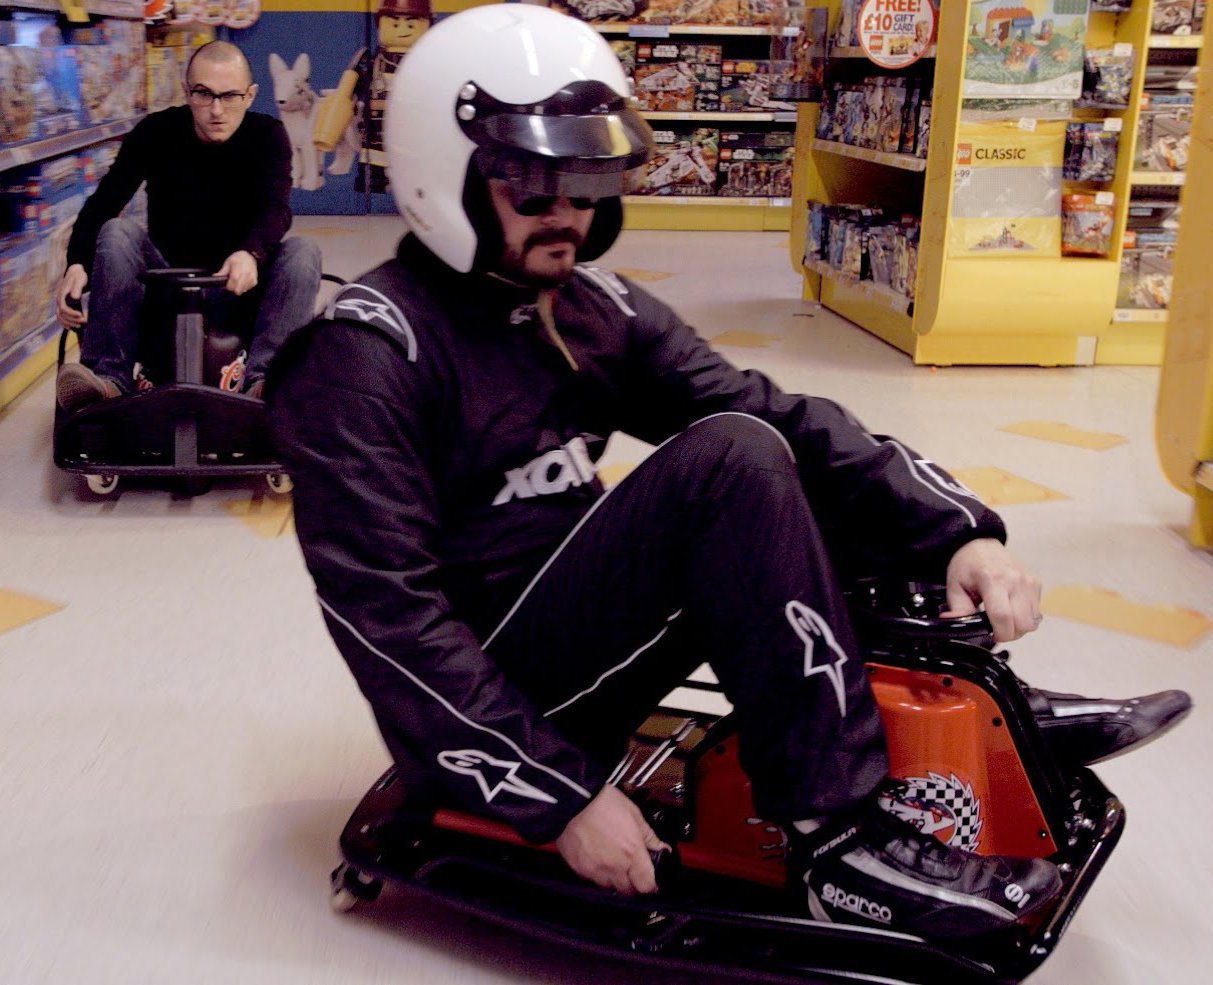 XCAR Rides the Crazy Cart XL in a Toy Store